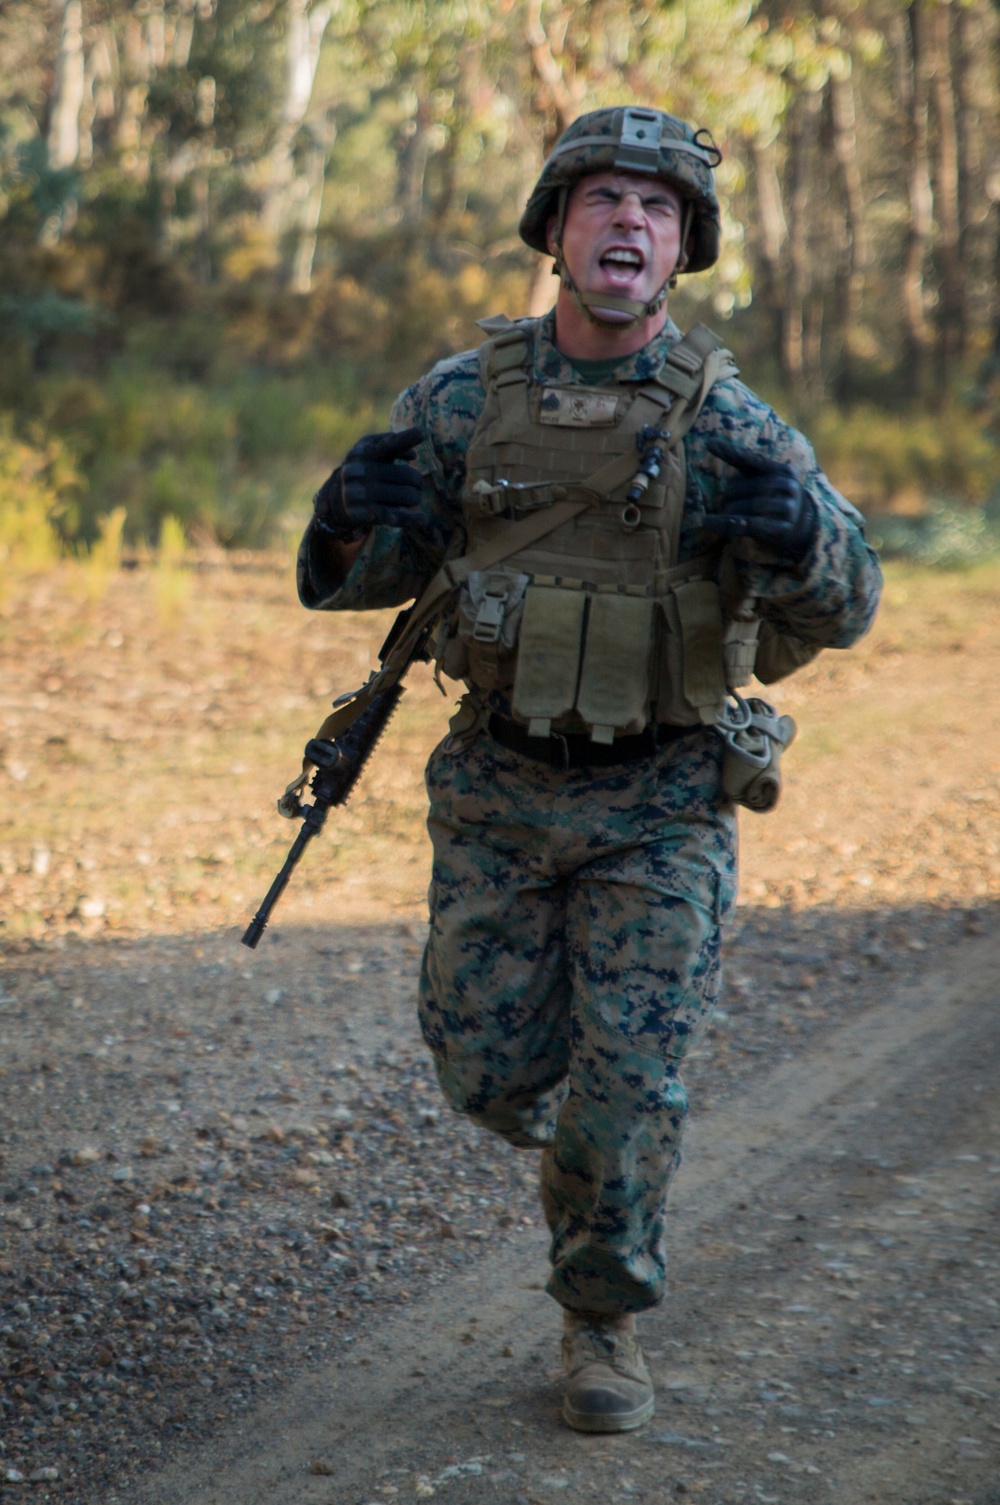 Pennsylvania Marine competes in Australian international shooting competition